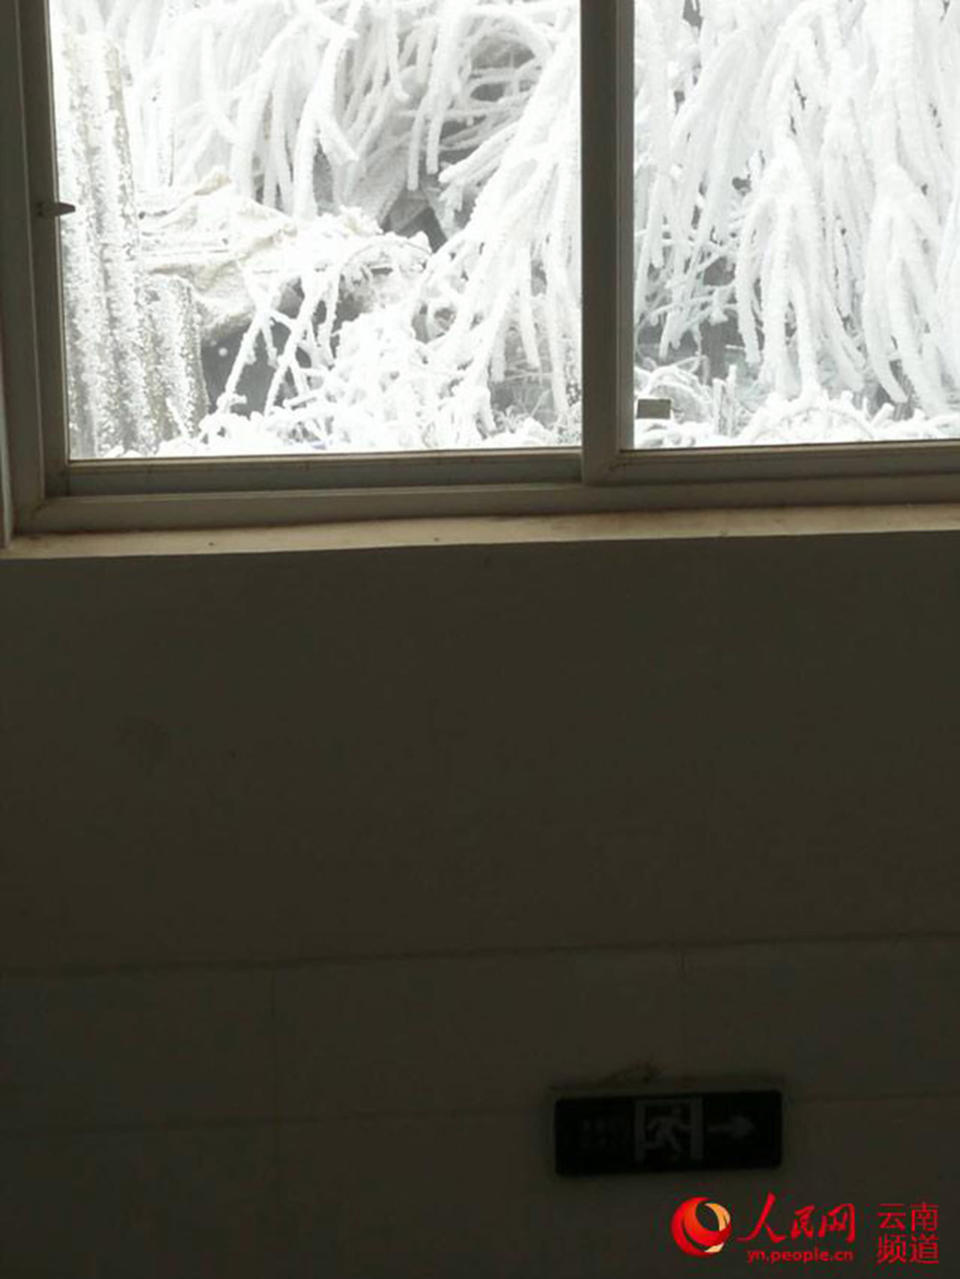 There is no heating in the school (Picture: Asia Wire)